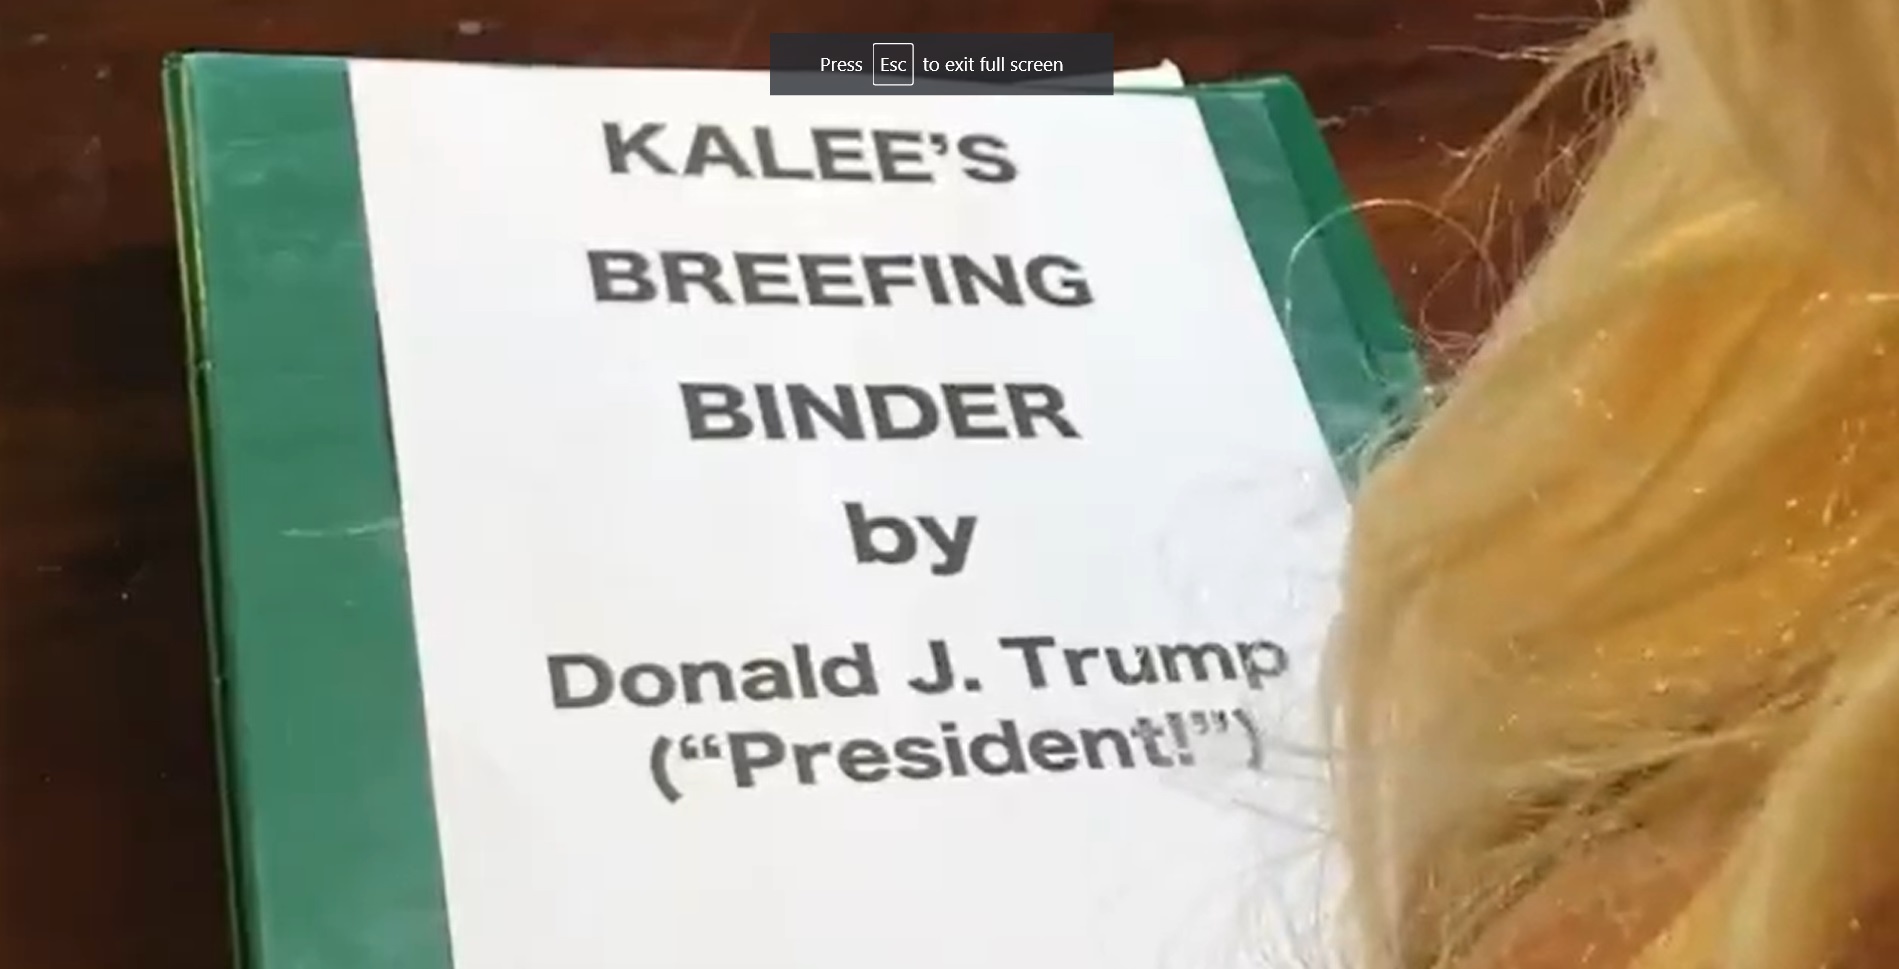 PHOTO Kayleigh McEnany's Briefing Book Has A Piece Of Paper On It Labeling It Kalee's Breefing Binder By Donald J Trump